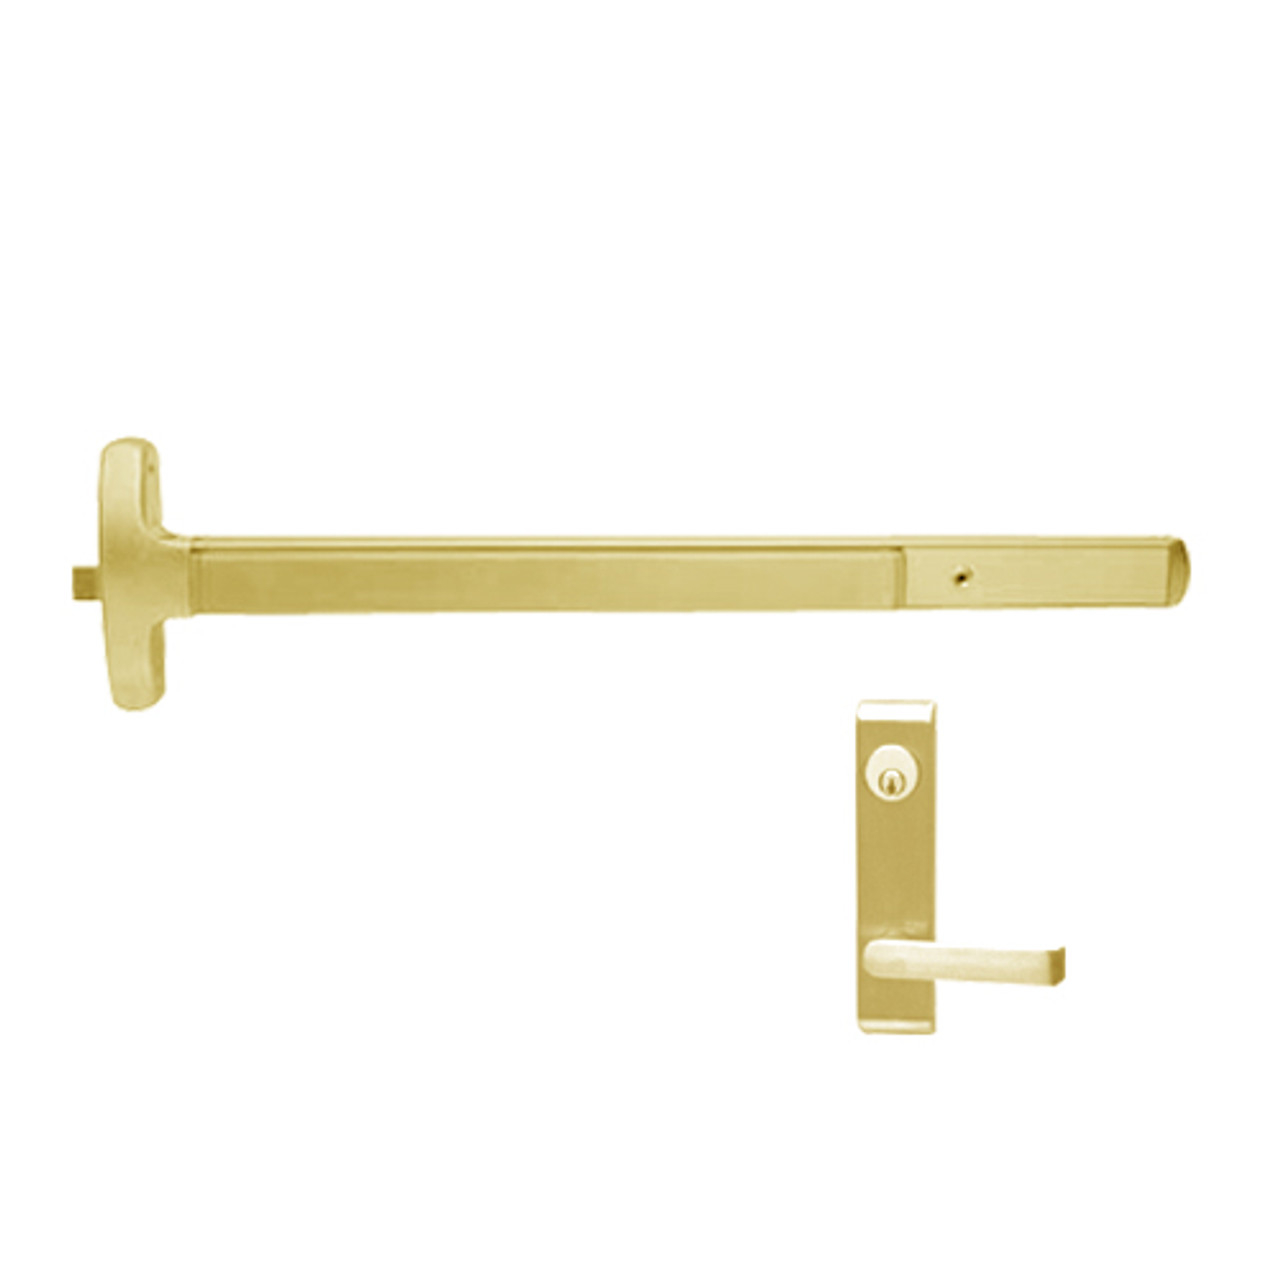 24-R-L-NL-DANE-US3-3-LHR Falcon Exit Device in Polished Brass